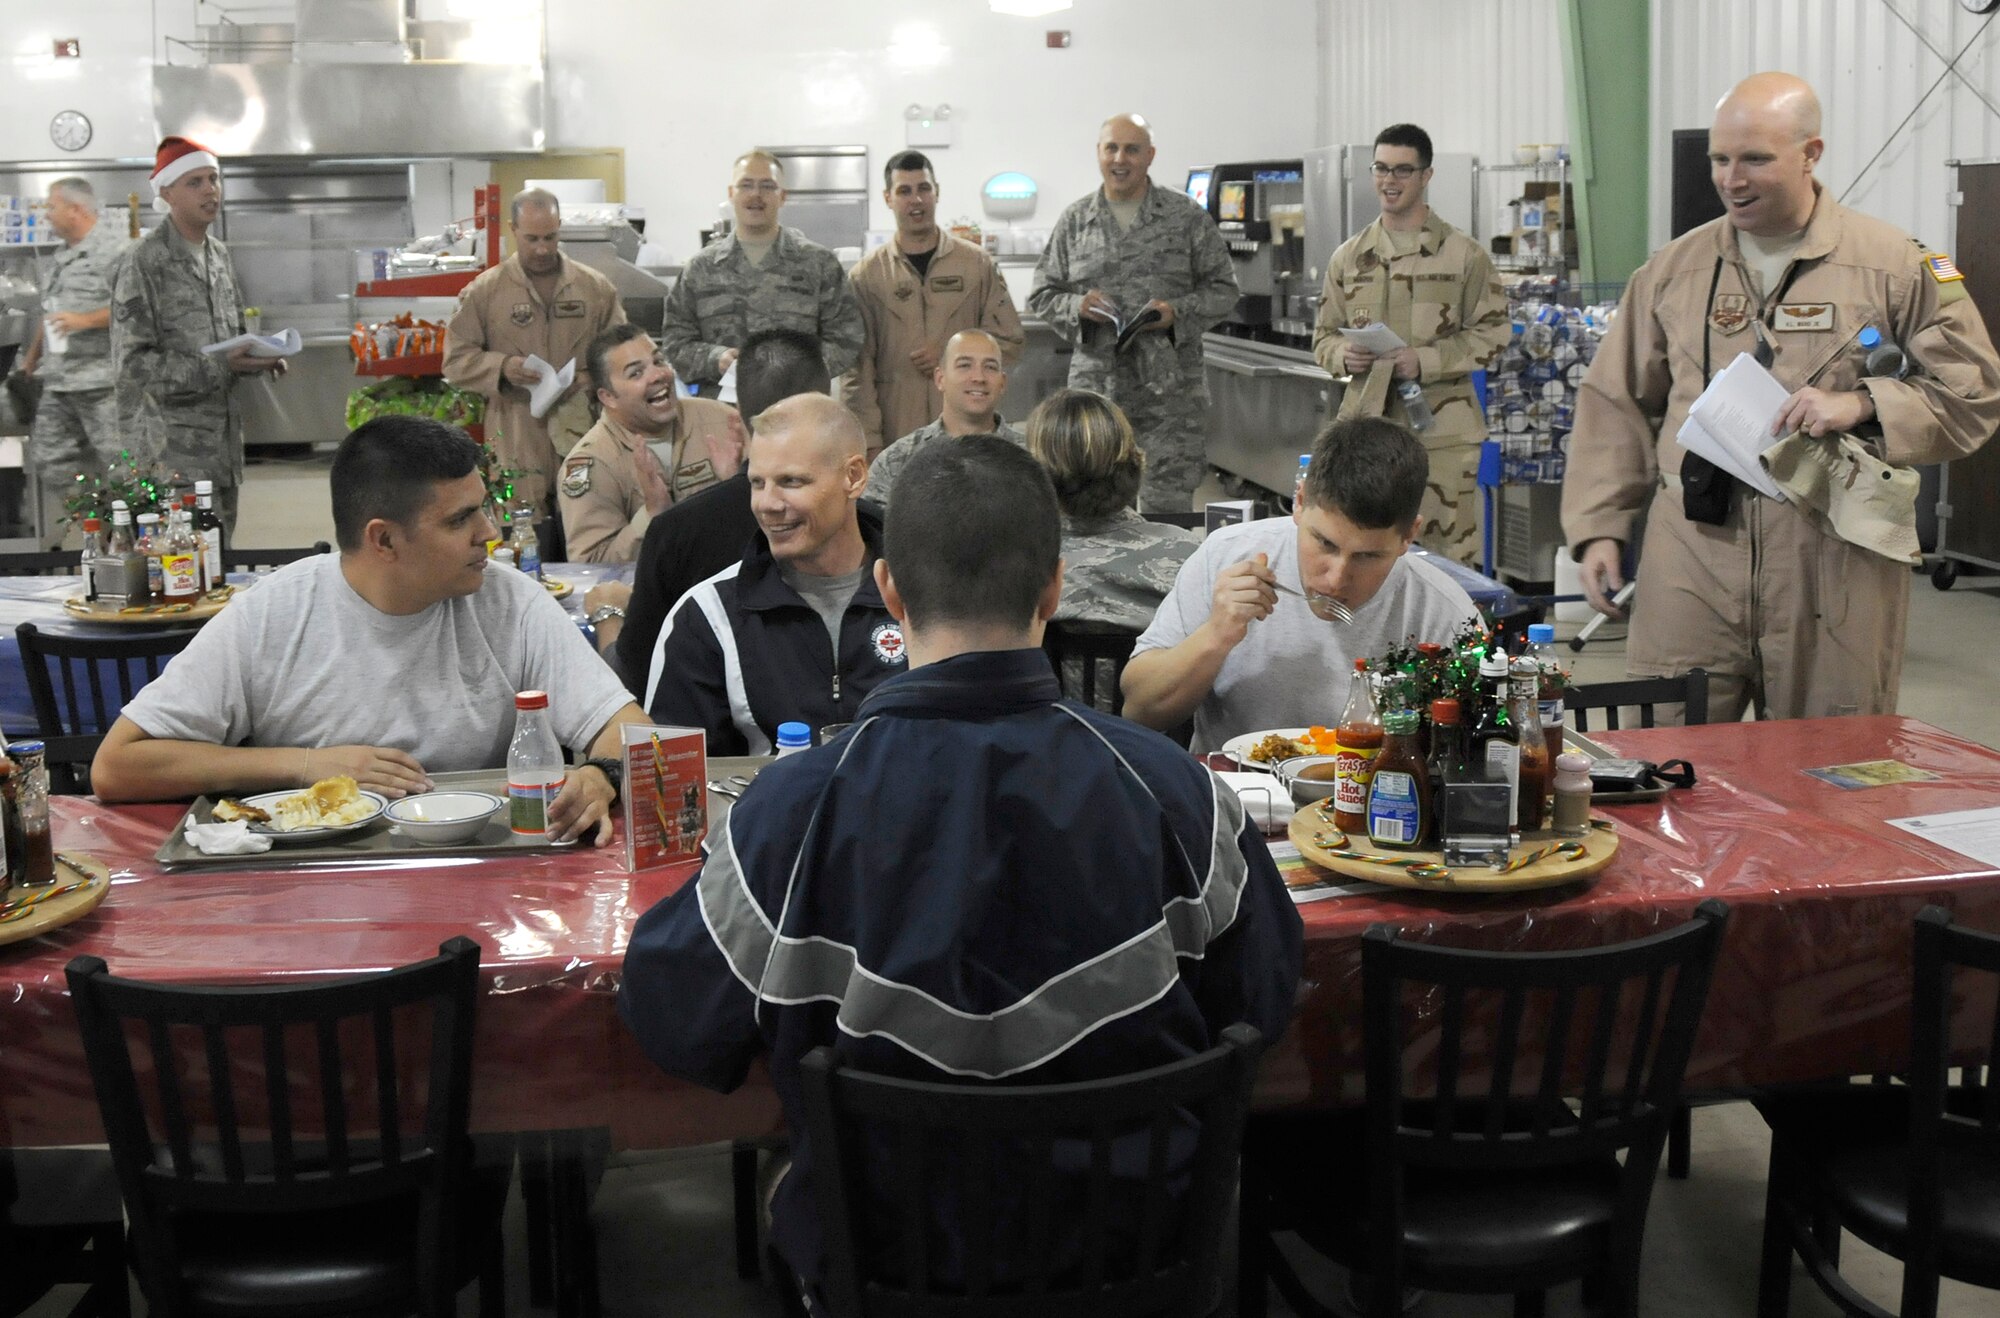 SOUTHWEST ASIA -- Members of the 380th Air Expeditionary wing sing Christmas carols at the Oasis Dining Facility here Dec. 24. The 380th celebrated the holidays with a variety of events throughout the week of Christmas. Members of the Seven Sands Chapel spread holiday cheer with their voices traveling around the base providing a little taste of home by singing various carols. (U.S. Air Force photo/Tech. Sgt. Christopher A. Campbell) (released)